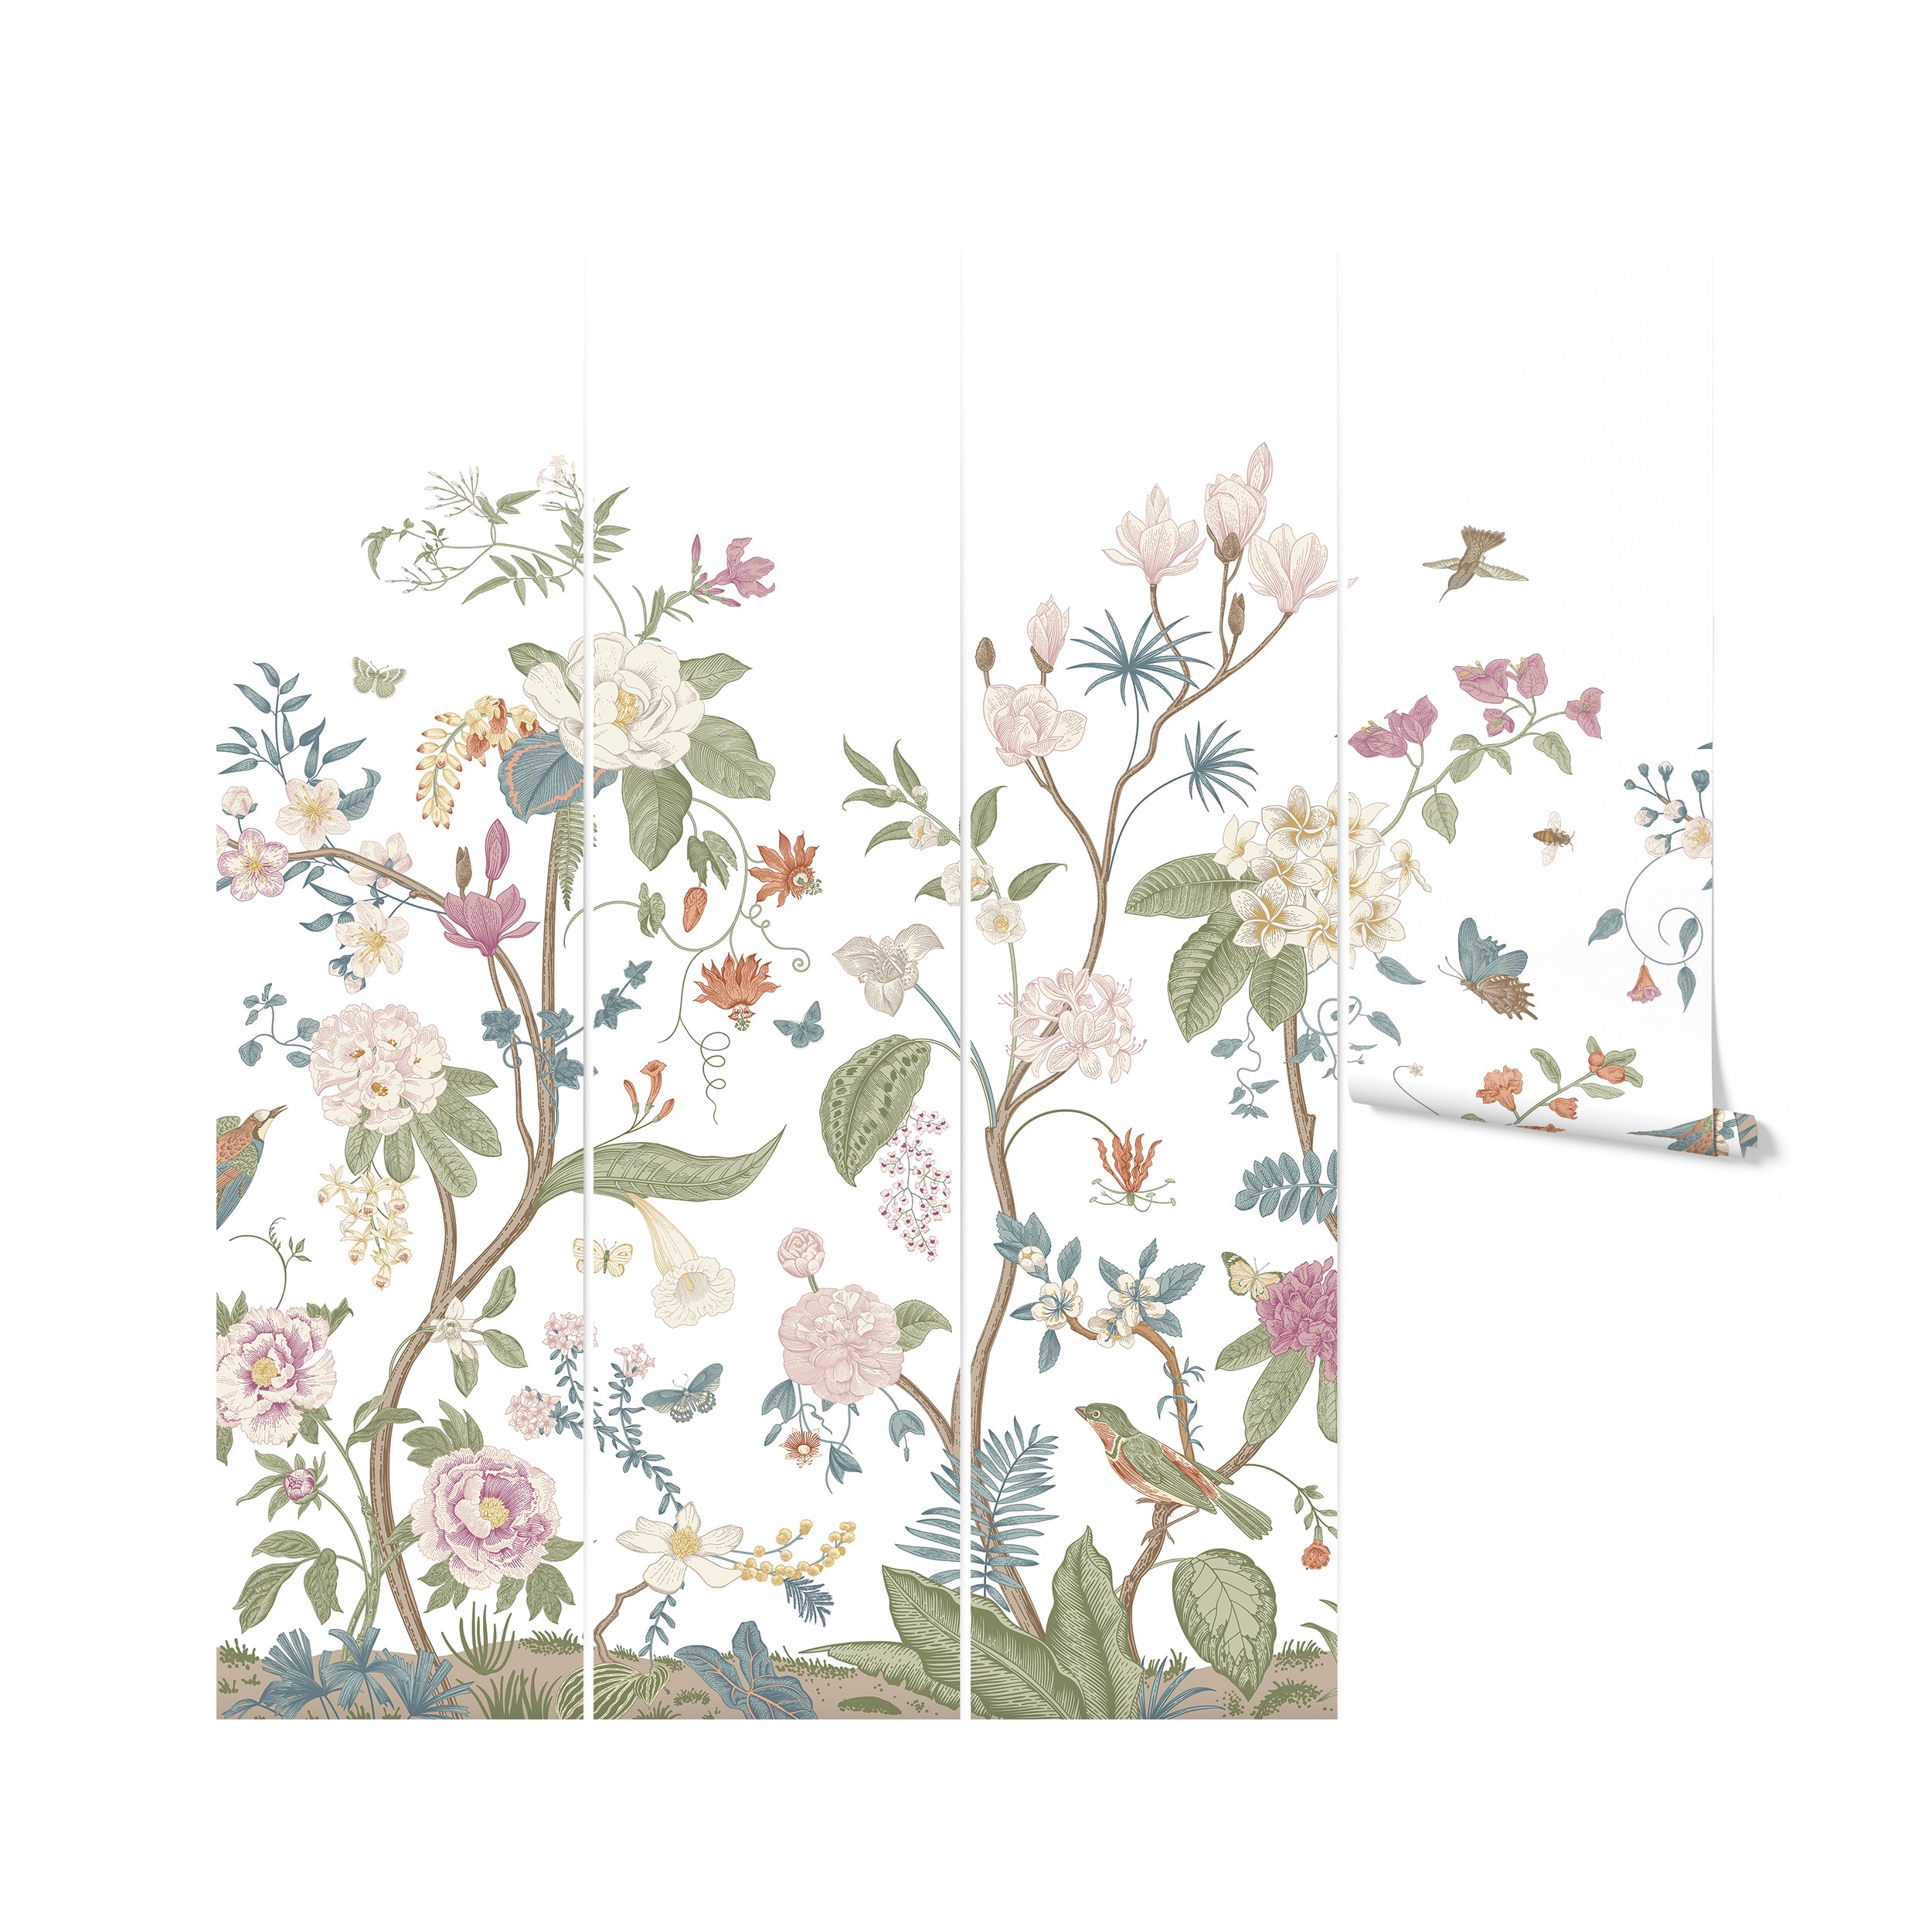 features a product mockup of the Vintage Floral Mural wallpaper in four rolled panels, illustrating the continuity of the pattern across multiple sections. The wallpaper design features a complex array of flowers, leaves, and birds in a seamless, flowing composition. The individual rolls reveal how the pattern repeats and connects, providing a glimpse of how the mural would look once installed on a wall.